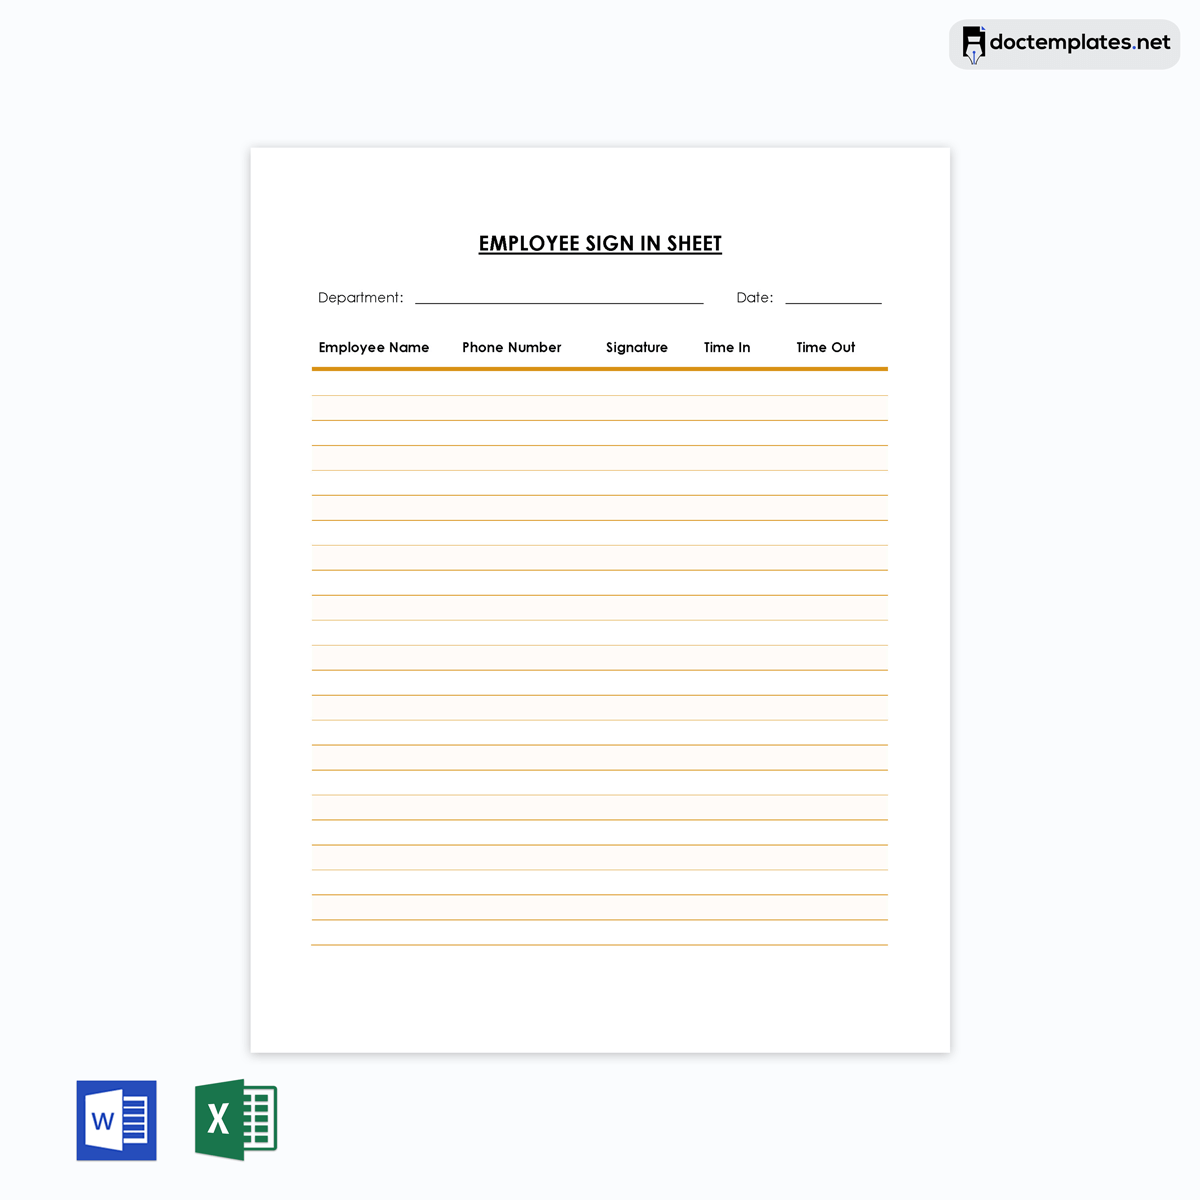 Sign in sheet template
